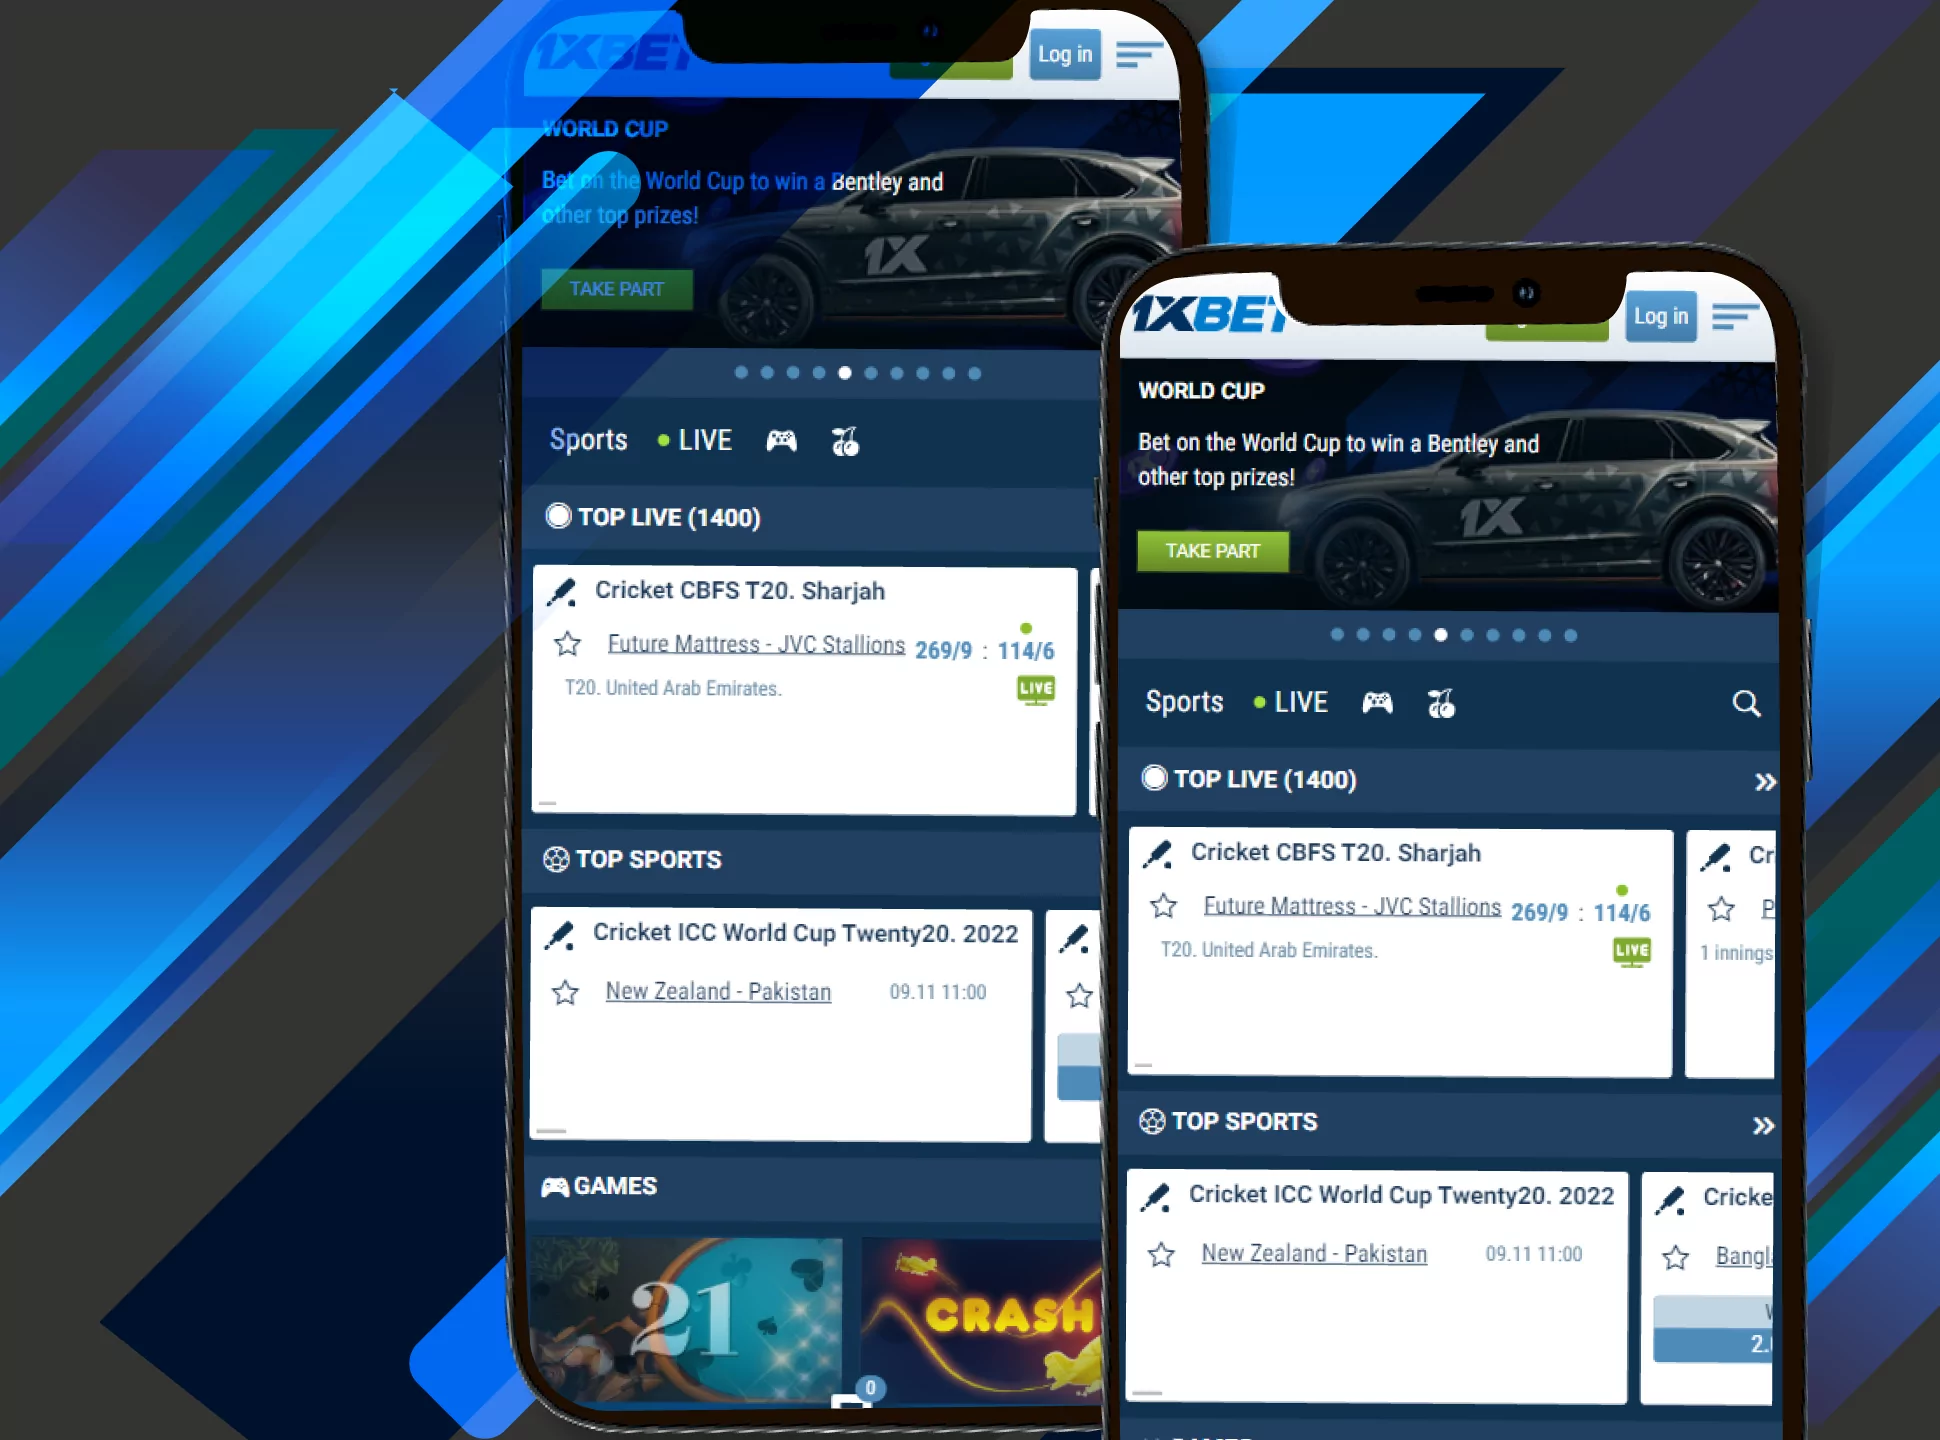 Open the 1xBet official website.